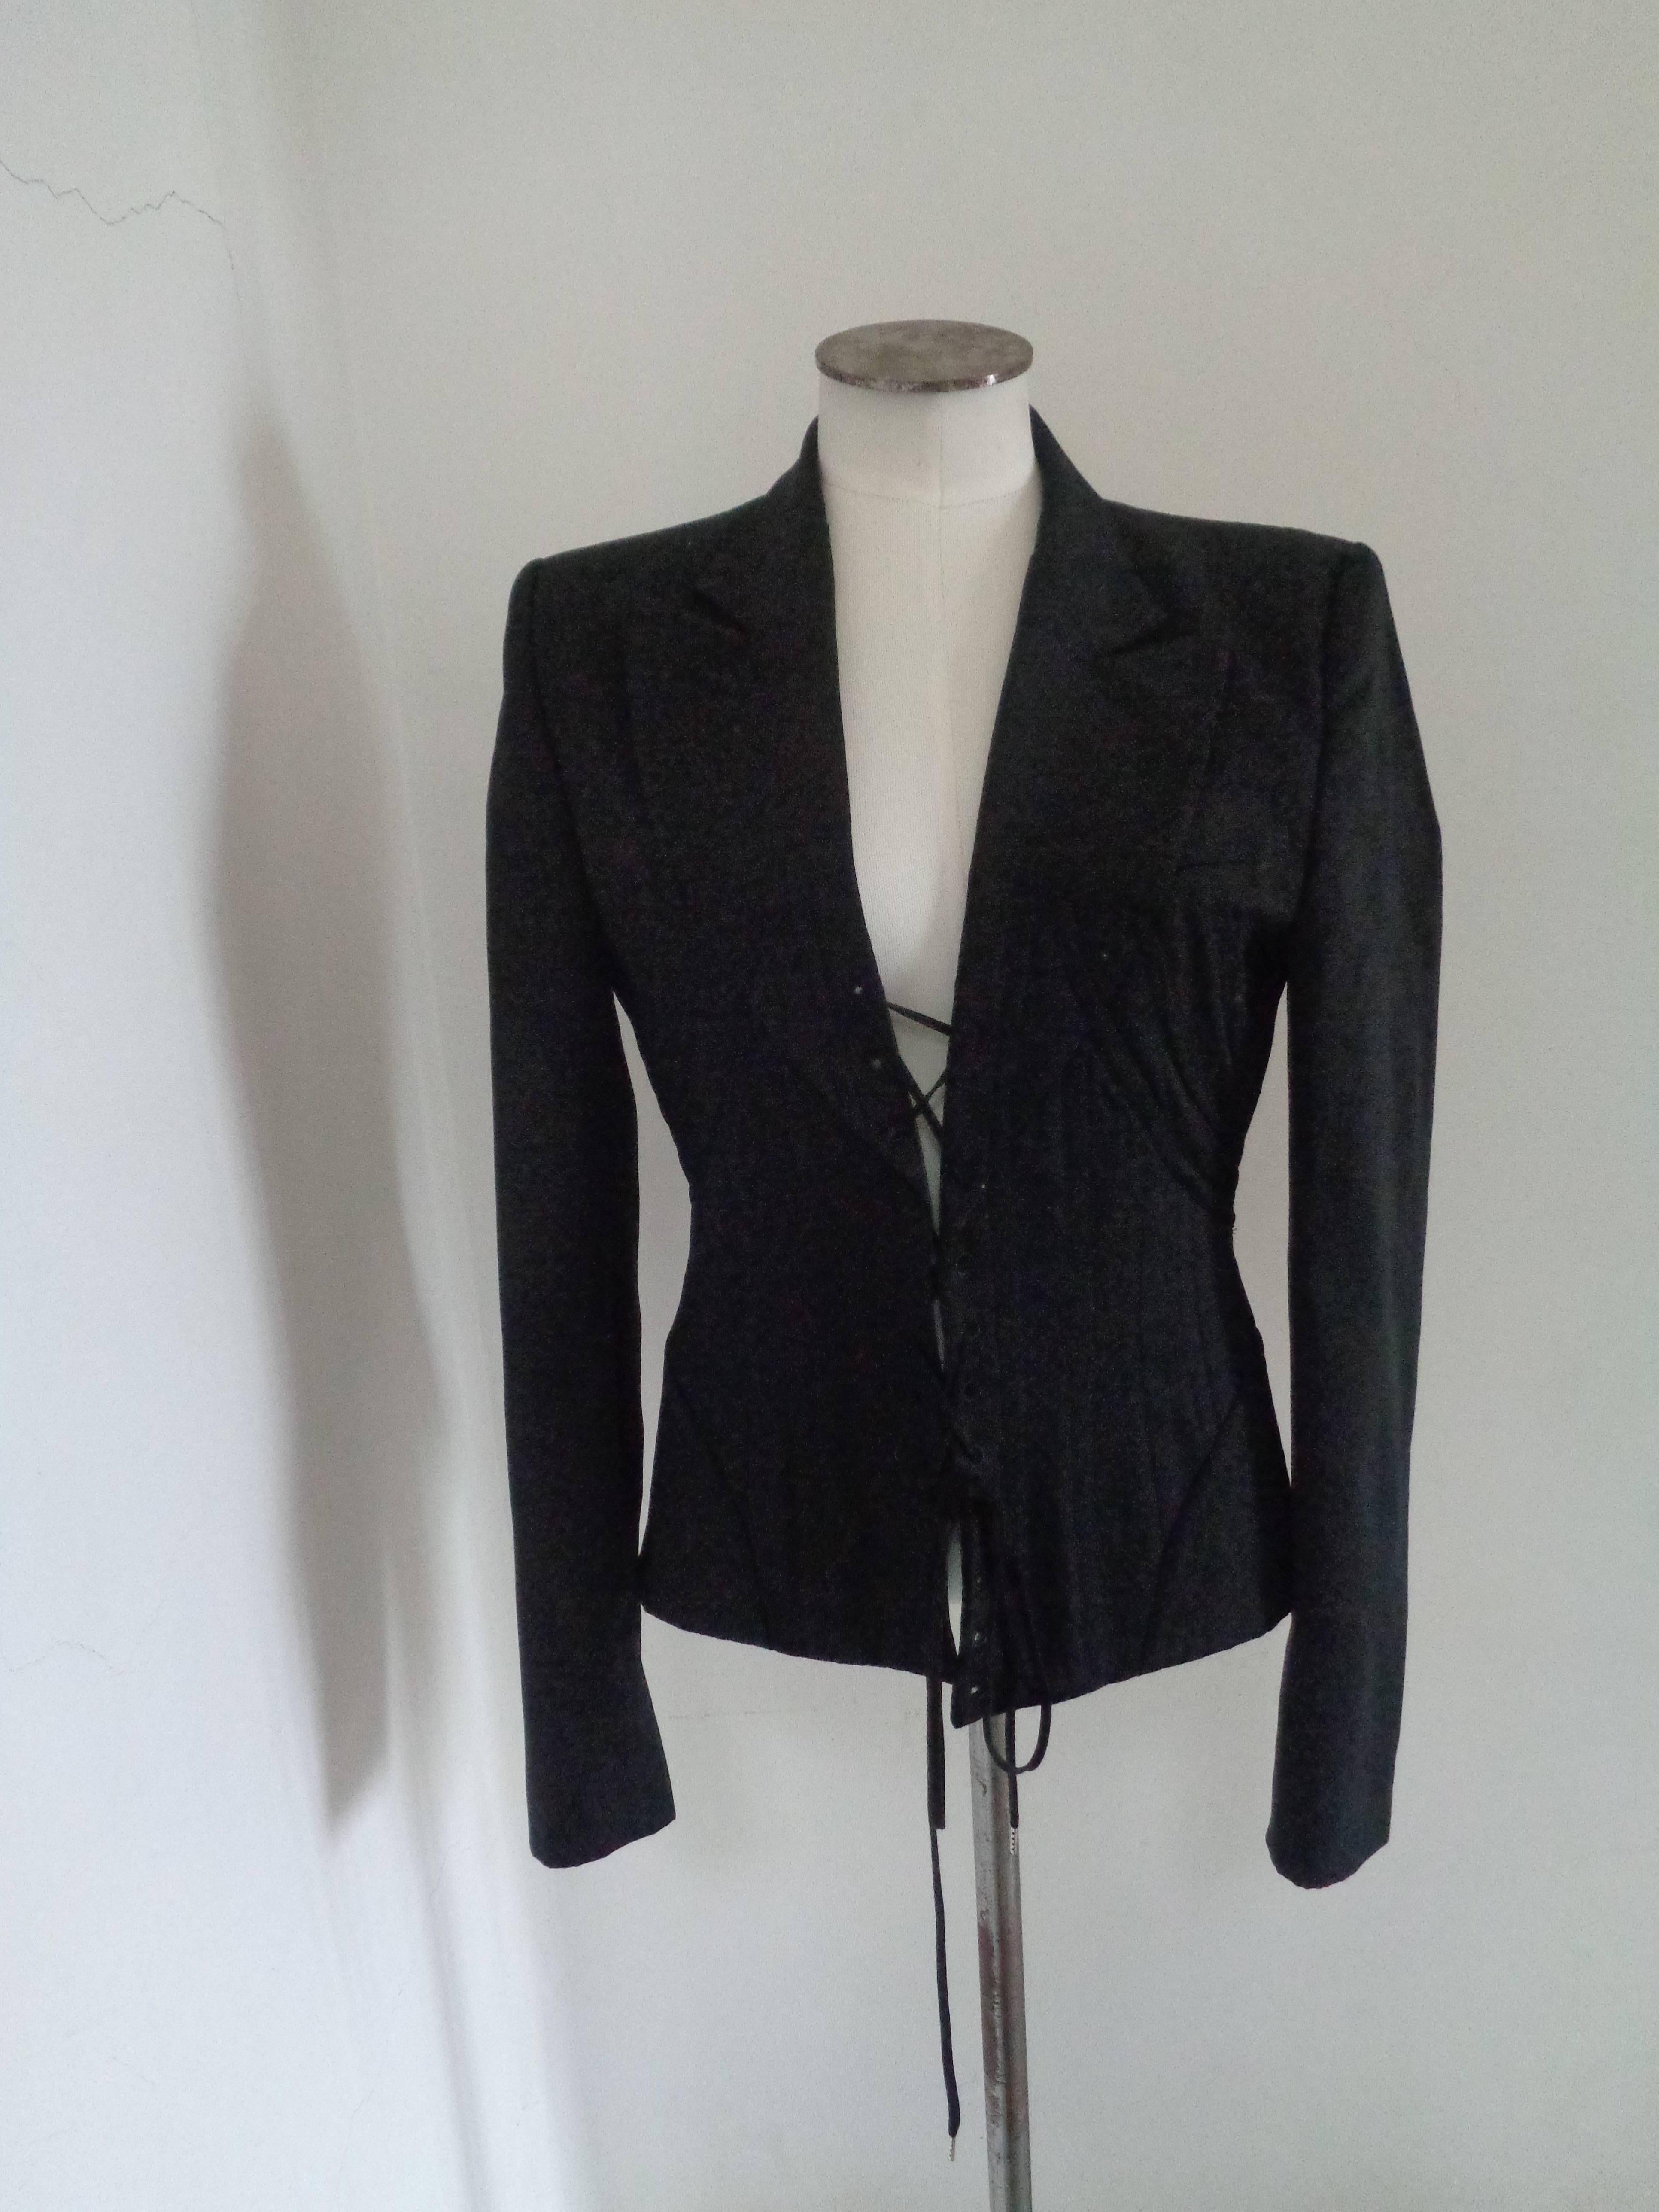 Alexander McQueen black cotton jacket

totally made in italy in italian size range 46

composition: cotton